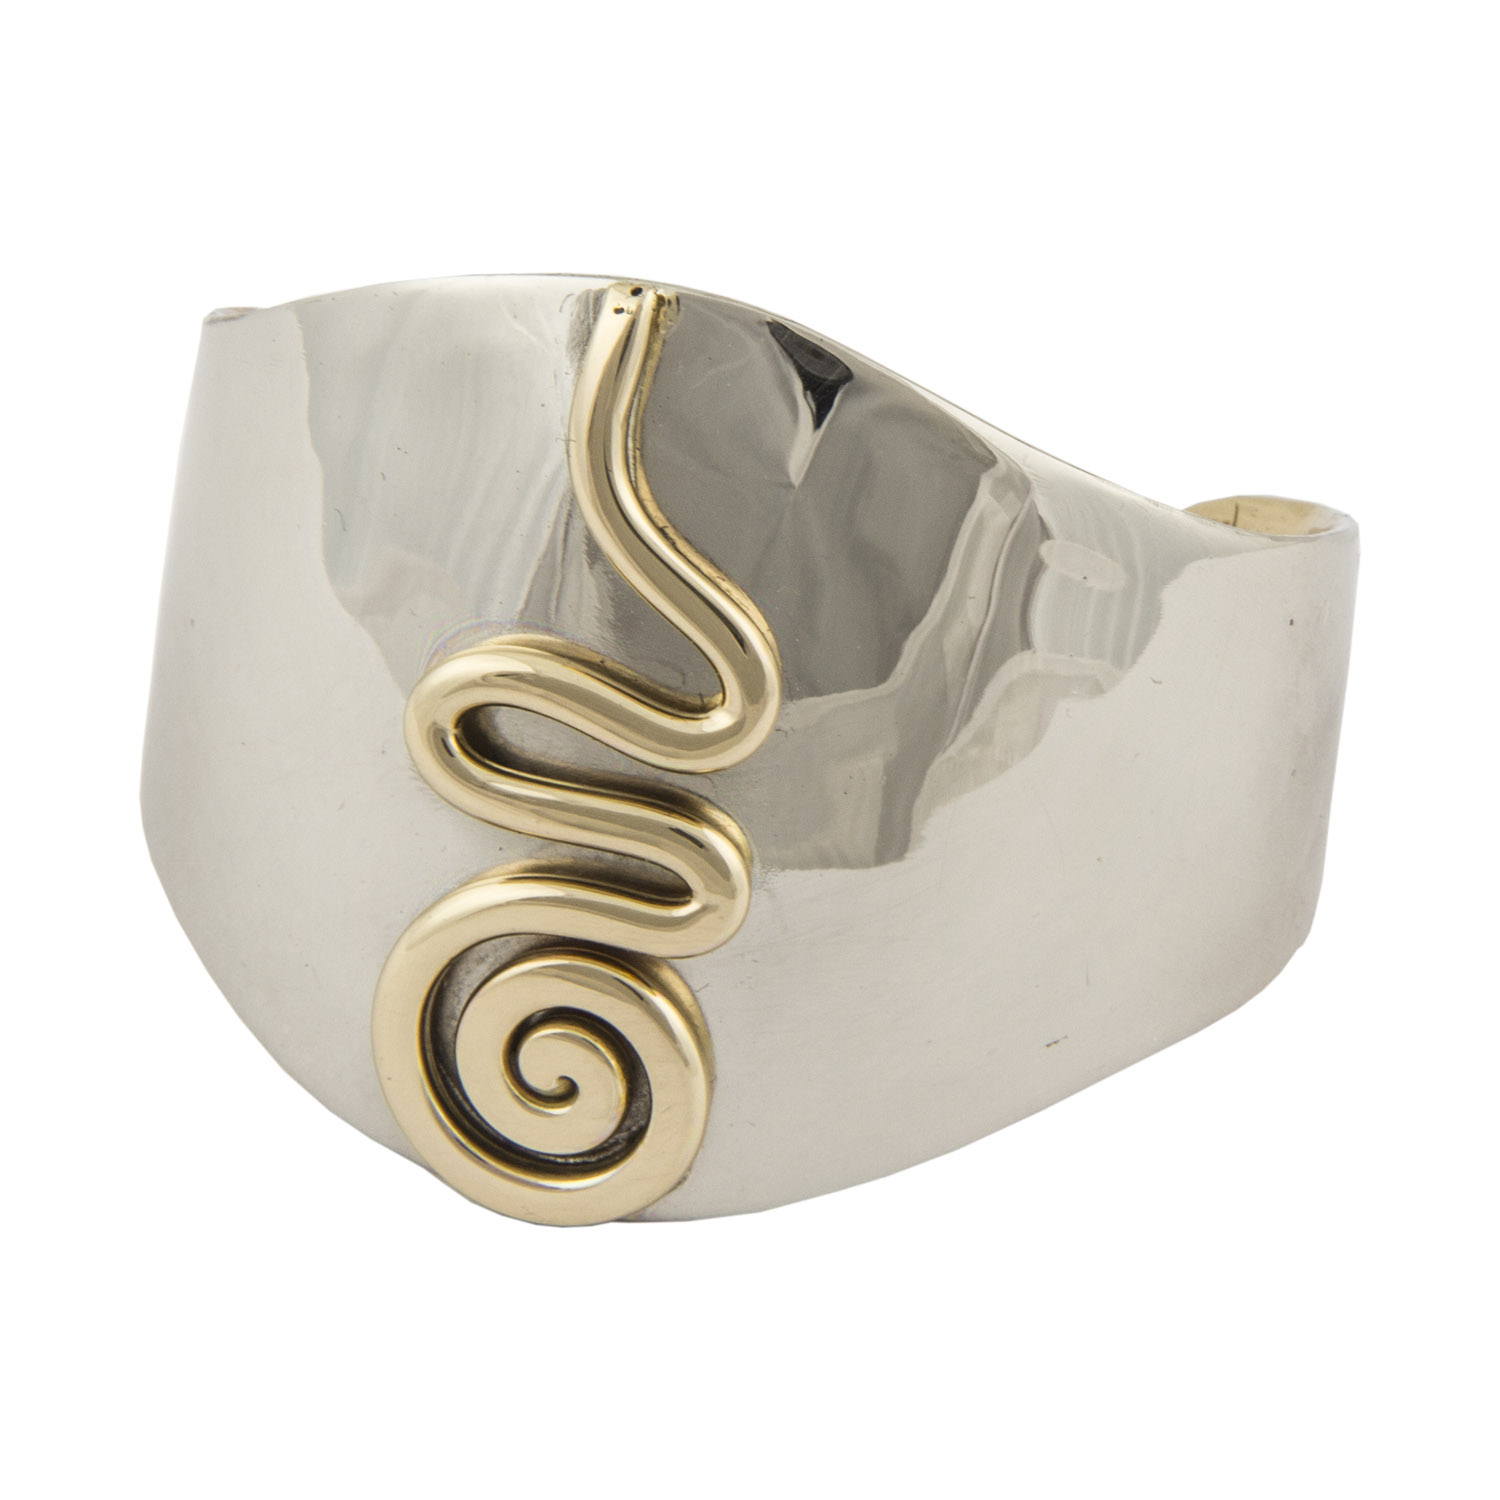 Product image for Grange Irish Jewelry - Silver Two Tone Center Celtic Spiral Wide Bangle